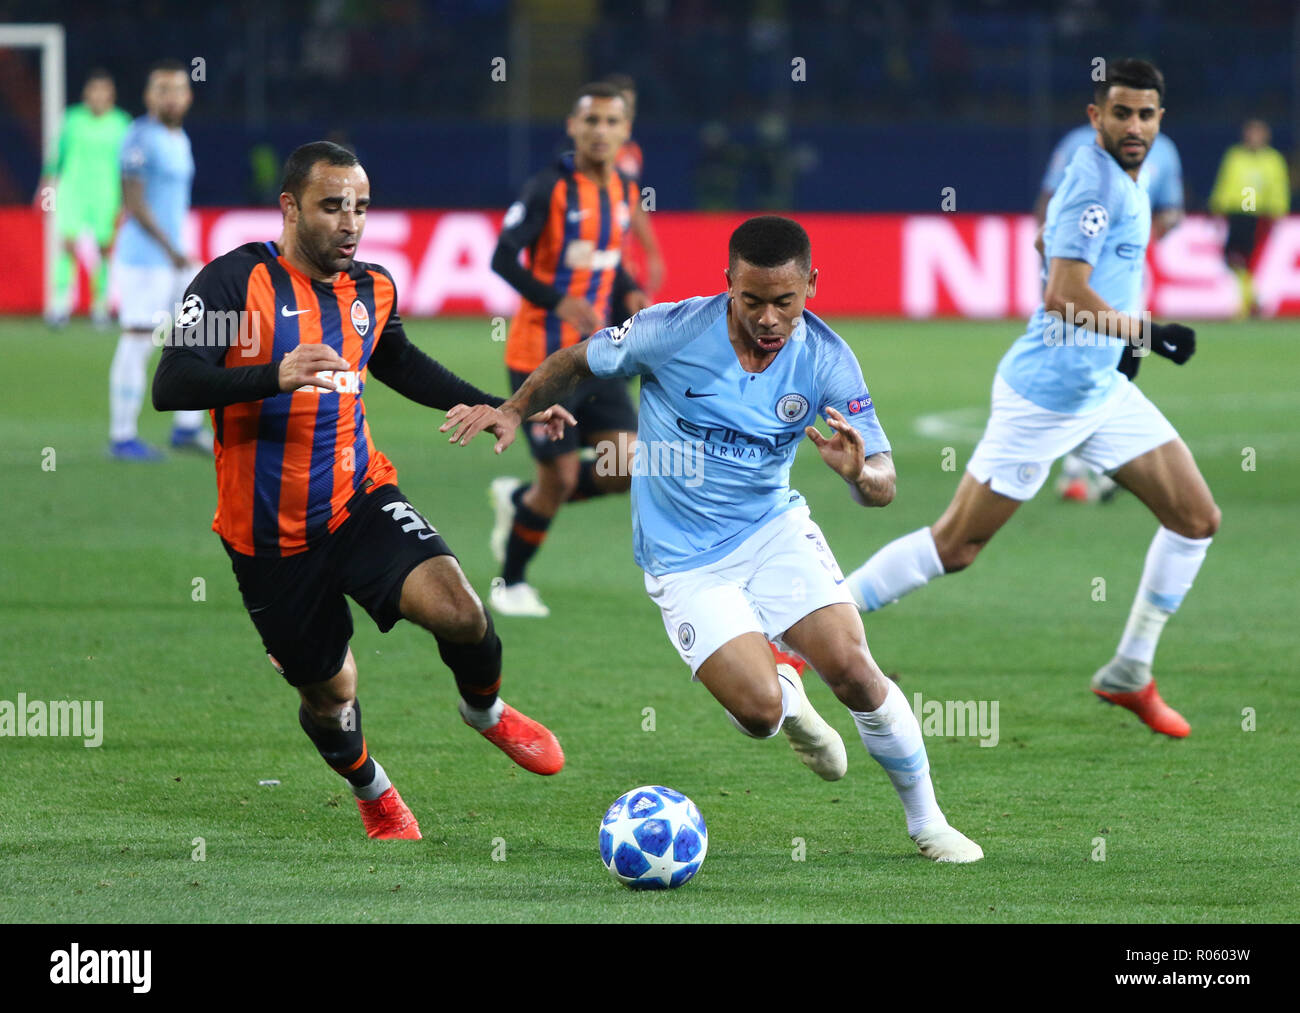 KHARKIV, UKRAINE - OCTOBER 23, 2018: Ismaili of Shakhtar Donetsk (L) fights for a ball with Gabriel Jesus of Manchester City during their UEFA Champio Stock Photo